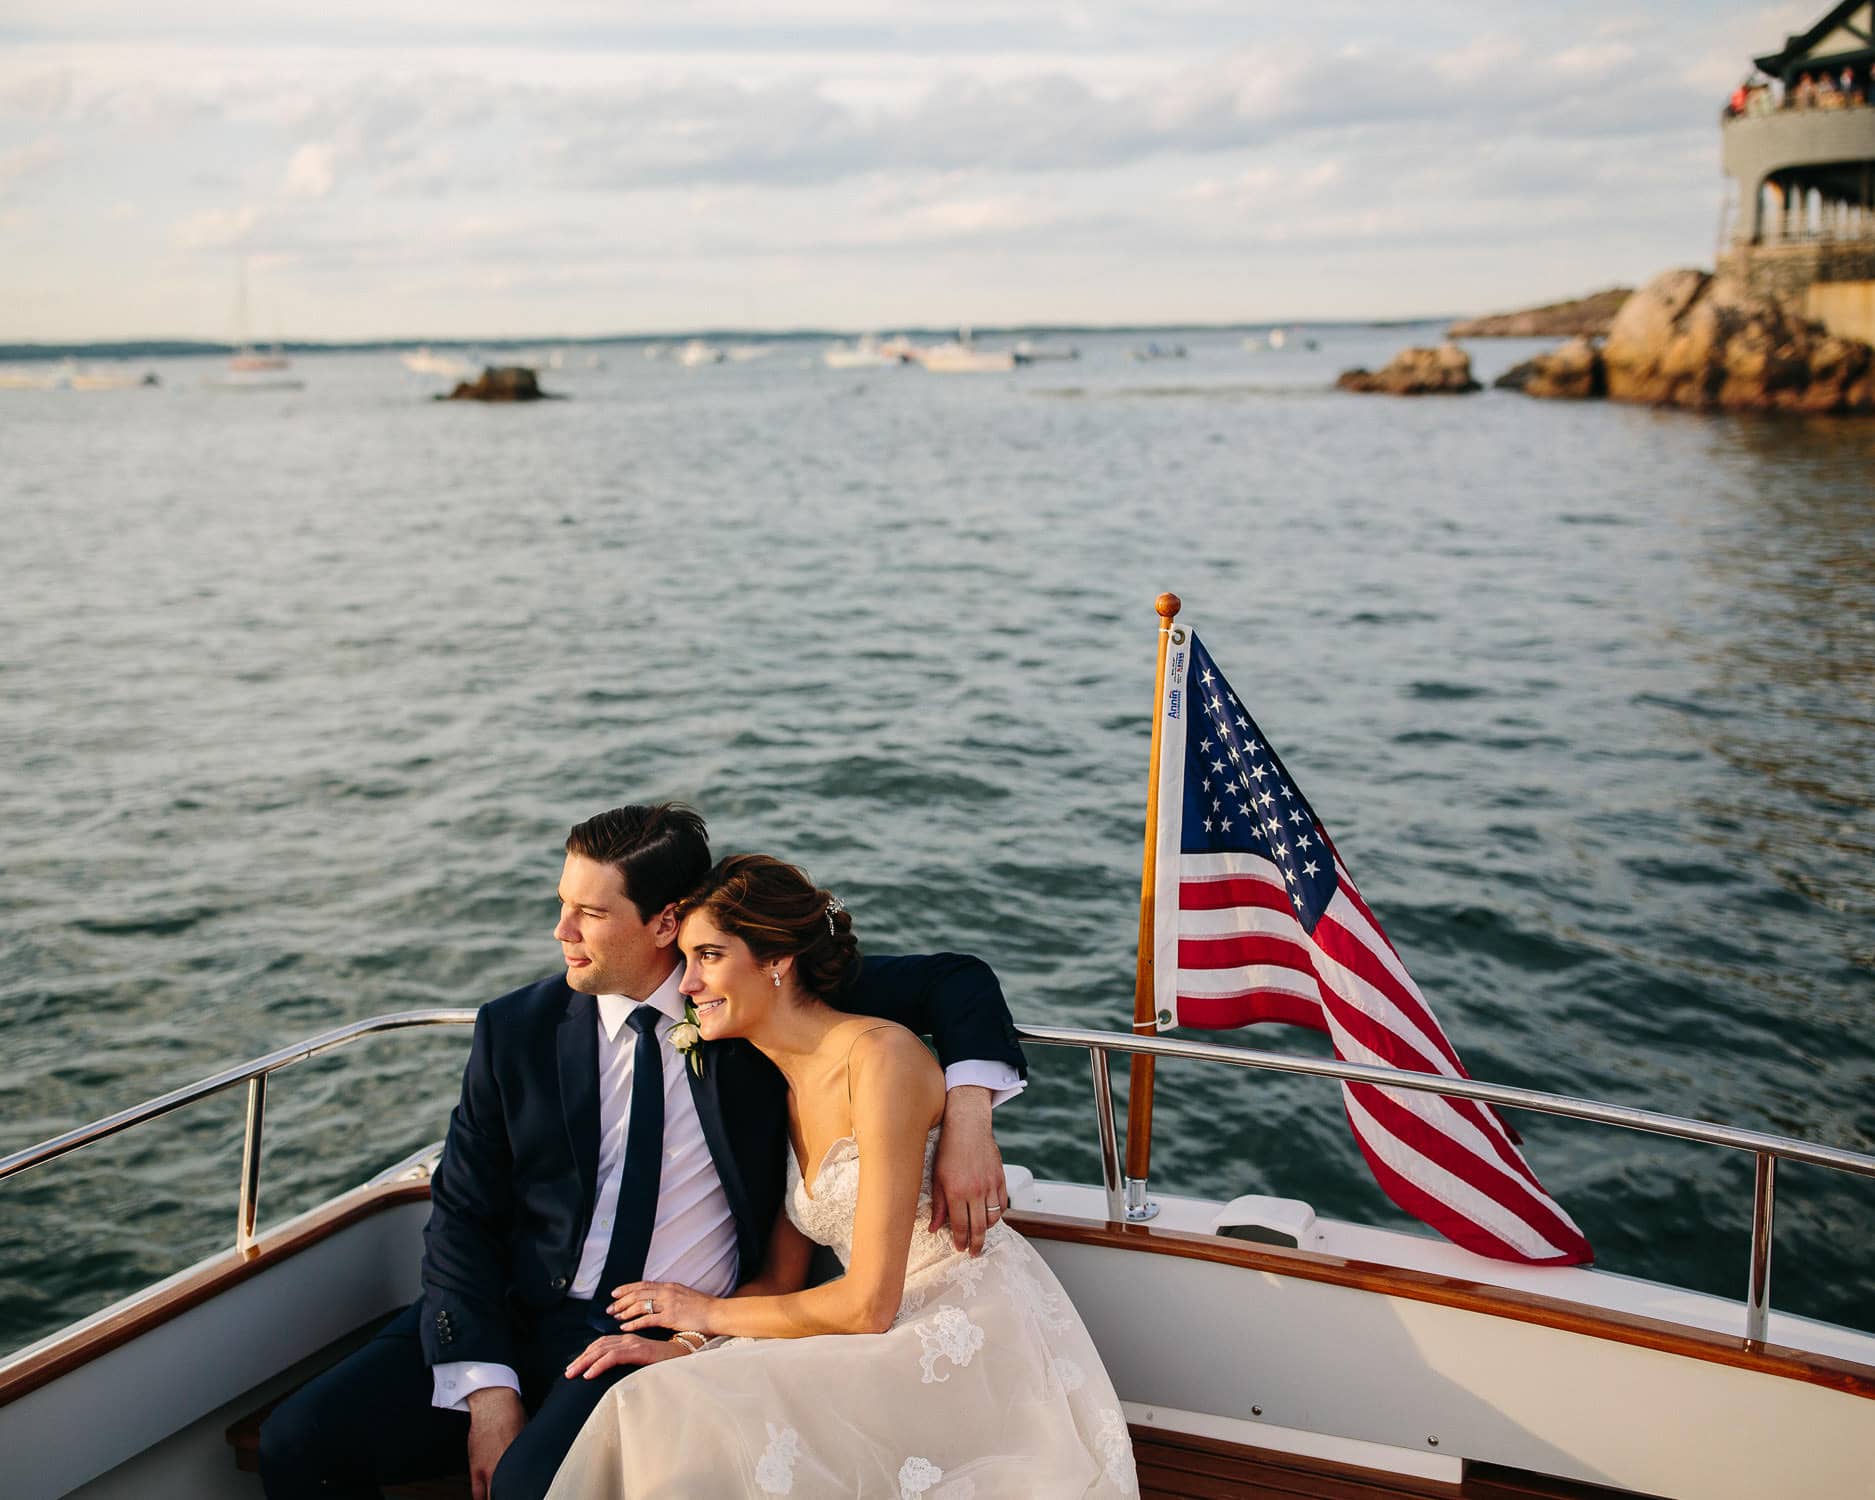 bride and groom enjoy sunset on the water at the Corinthian Yacht Club, Marblehead, MA | New England wedding photographer | Kelly Benvenuto Photography